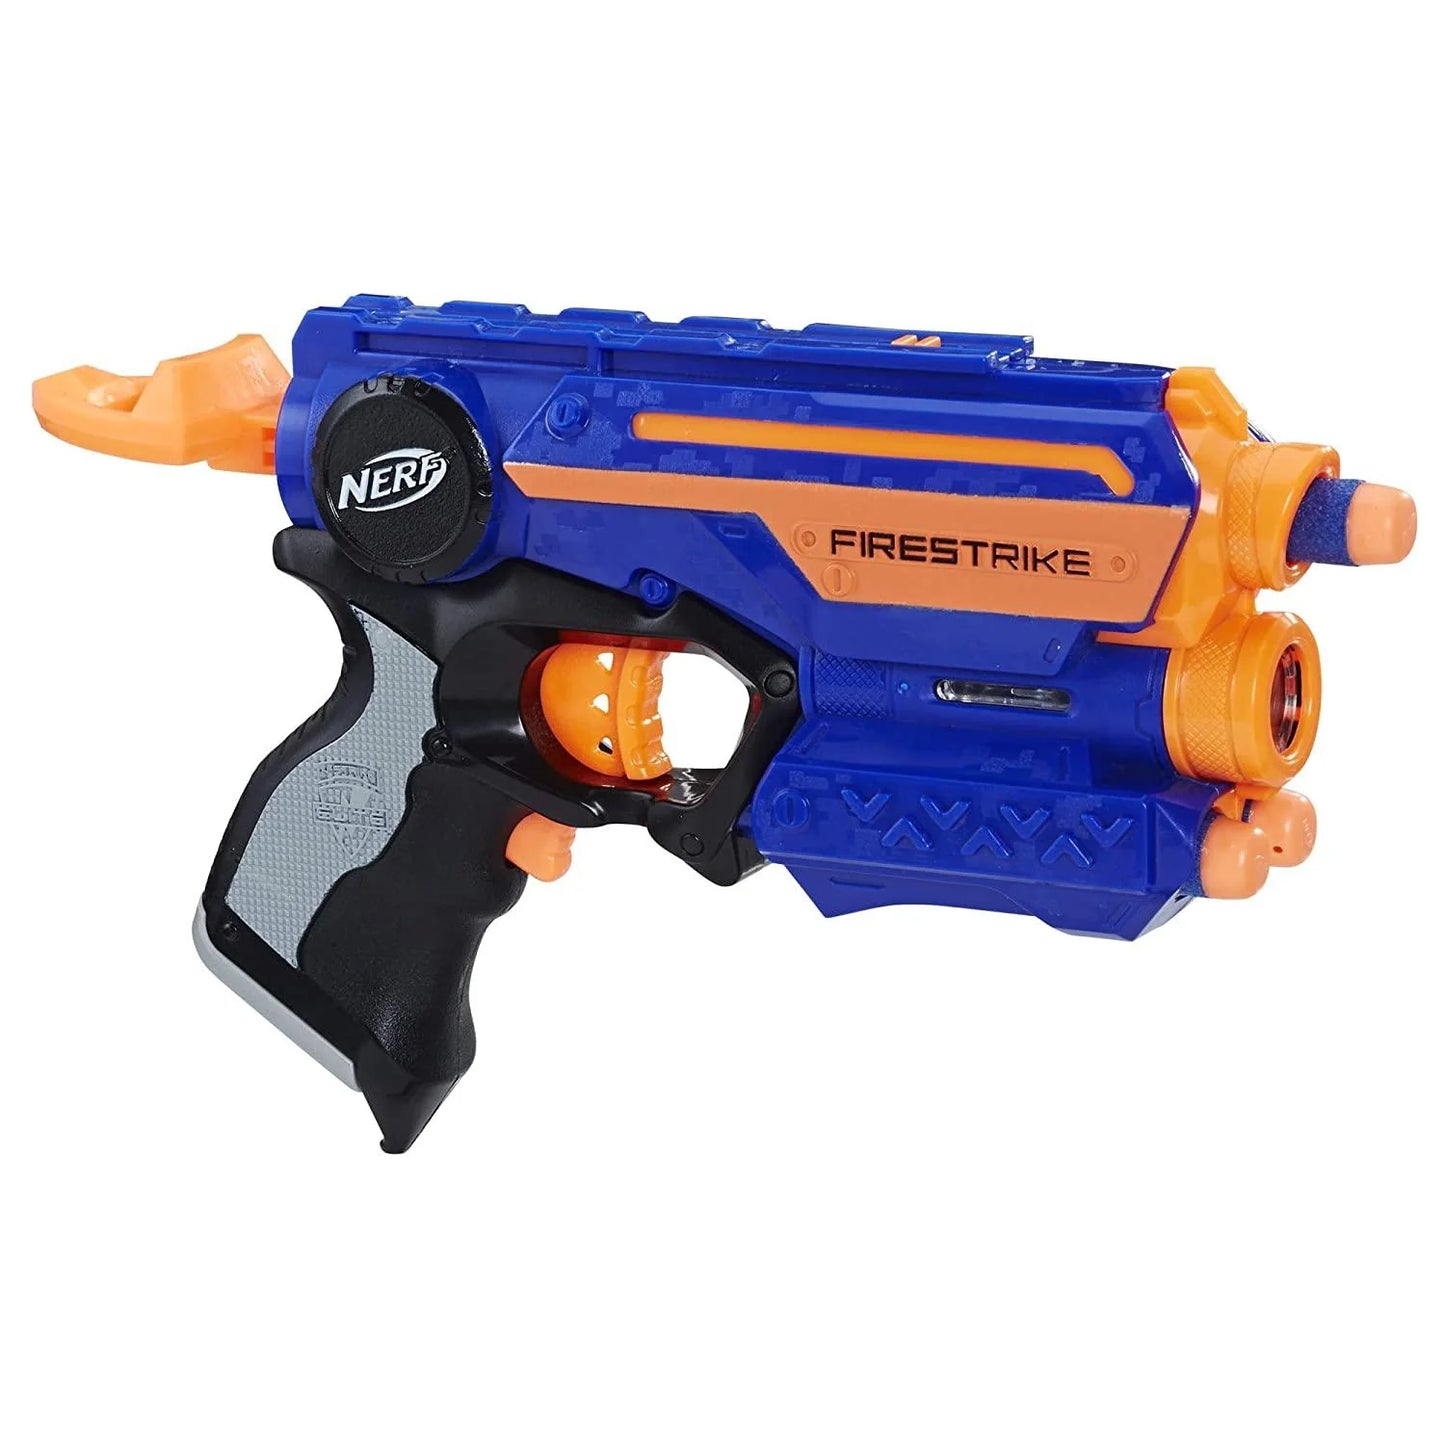 Nerf N-Strike Elite Firestrike Blaster For Ages 8 Years And Up